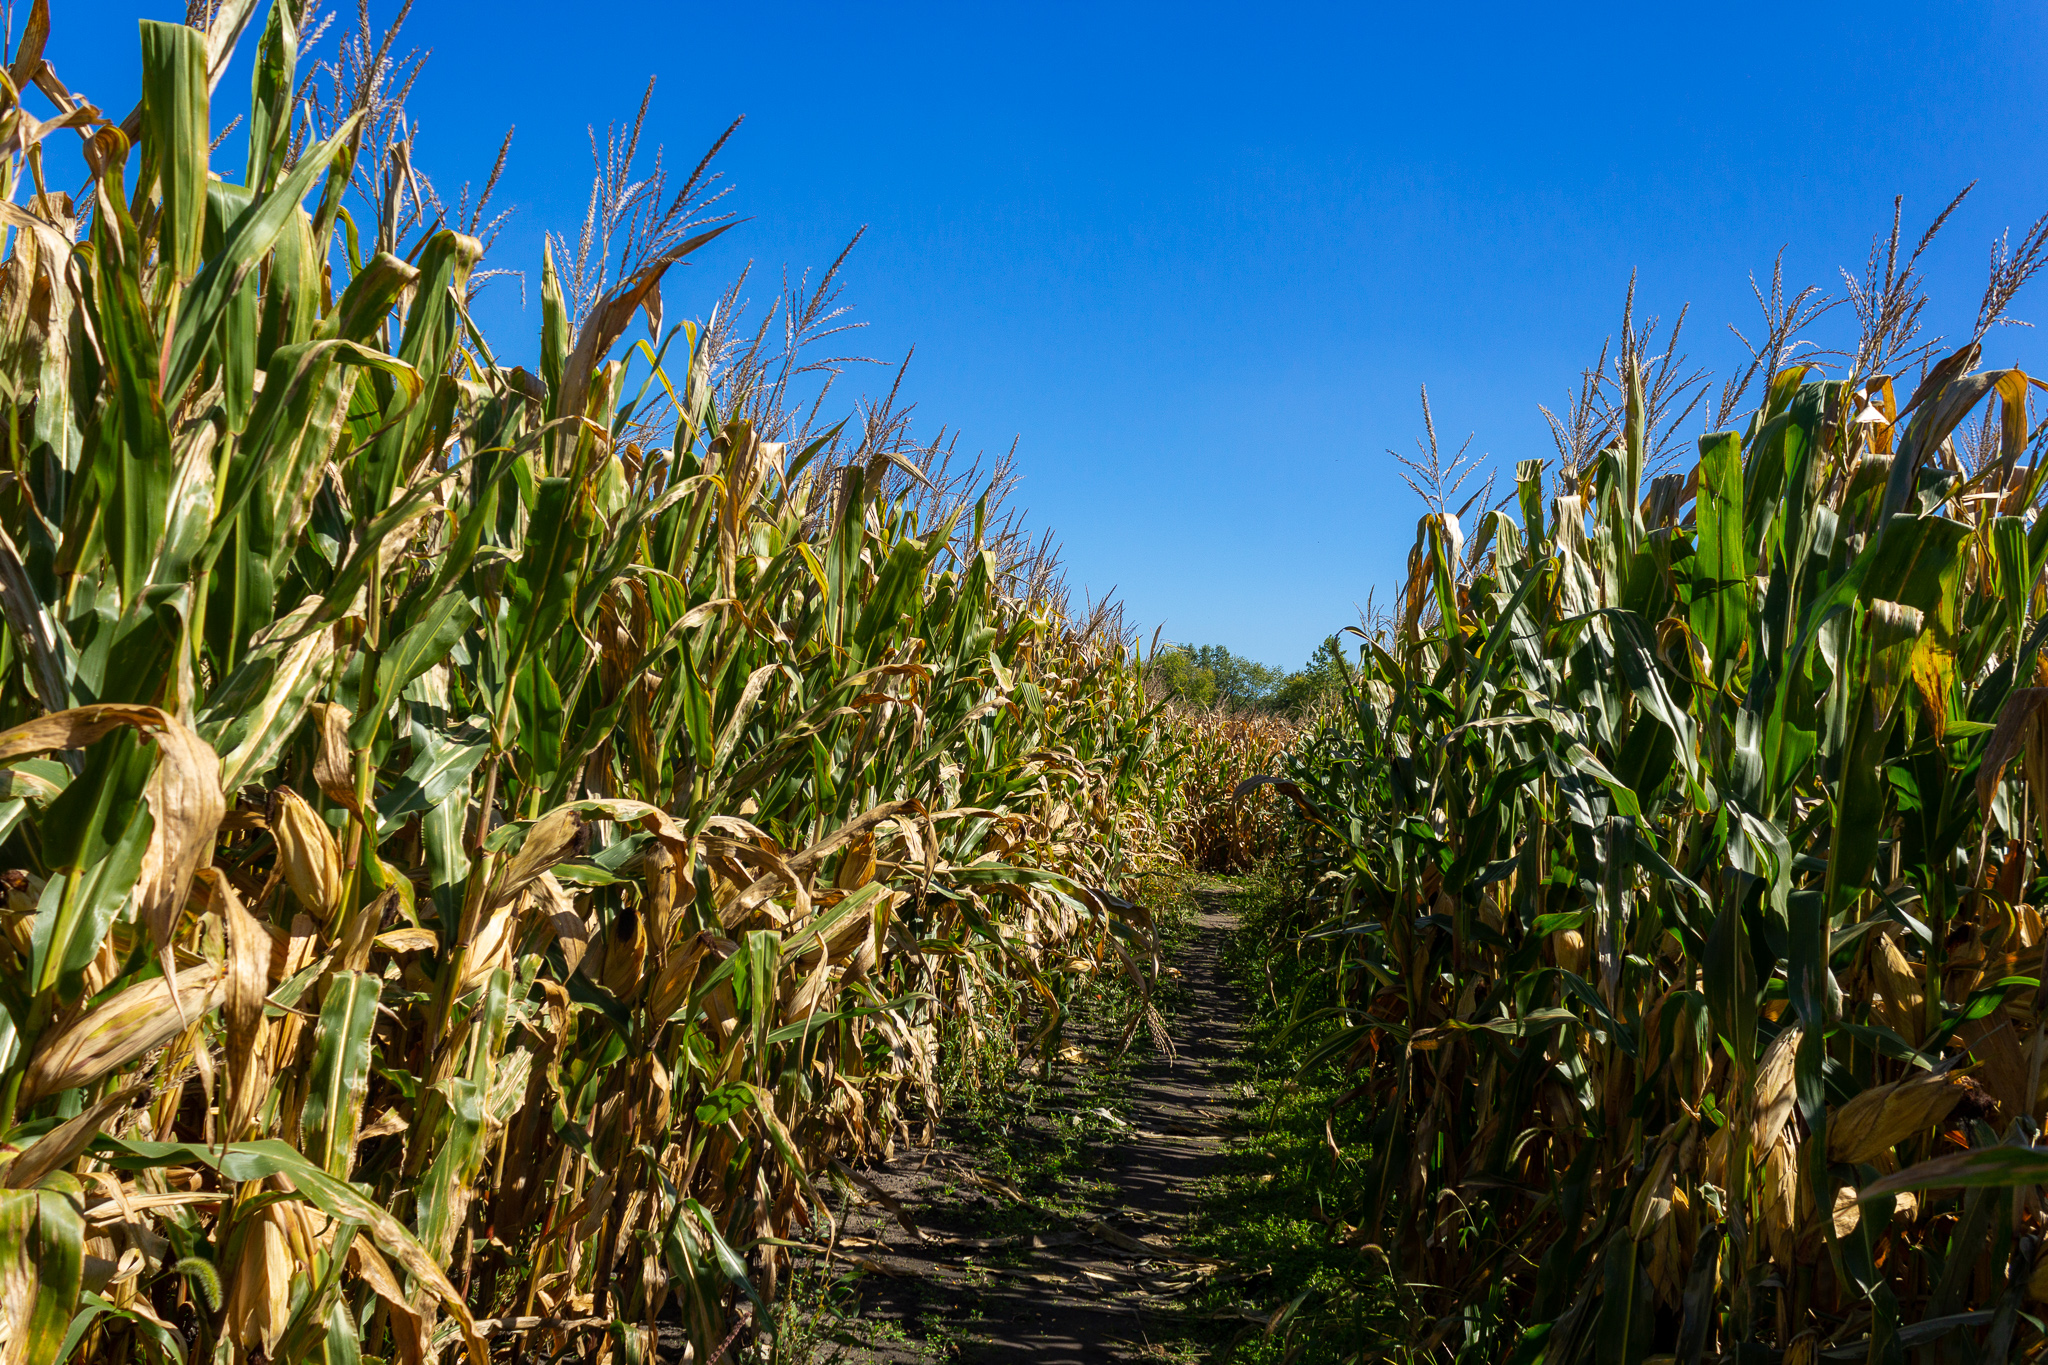 A long path, slanting to the right, cut through a field of yellow cornstalks under a blue sky